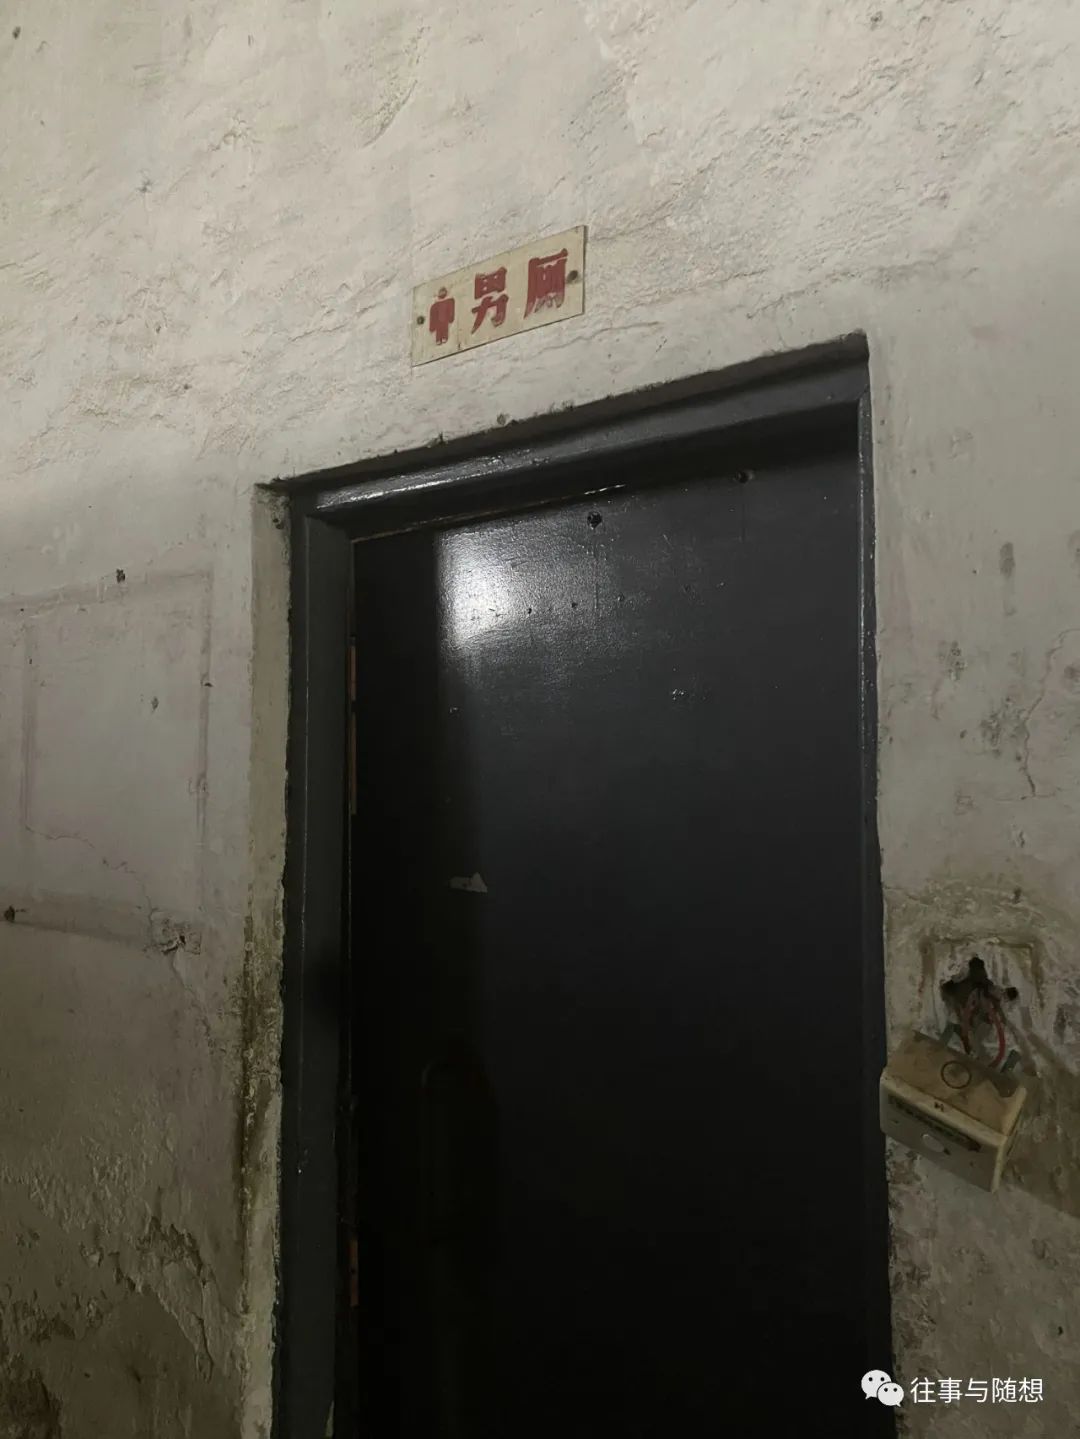 A black door in a very dirty white wall. A sign over the door reads "men's room" in red Chinese characters.